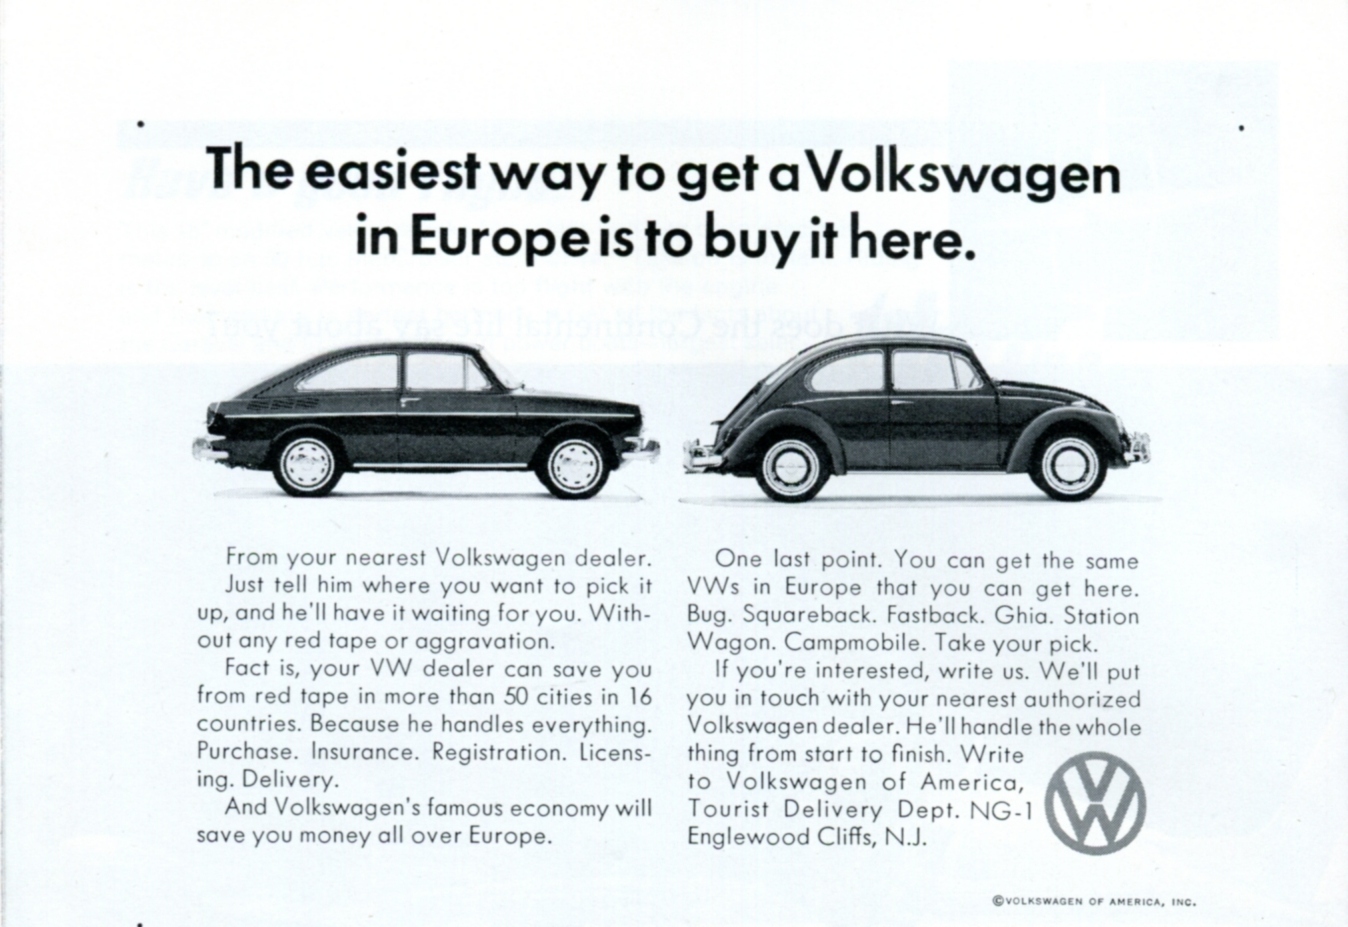 an advertit for a volkswagen car from the sixties